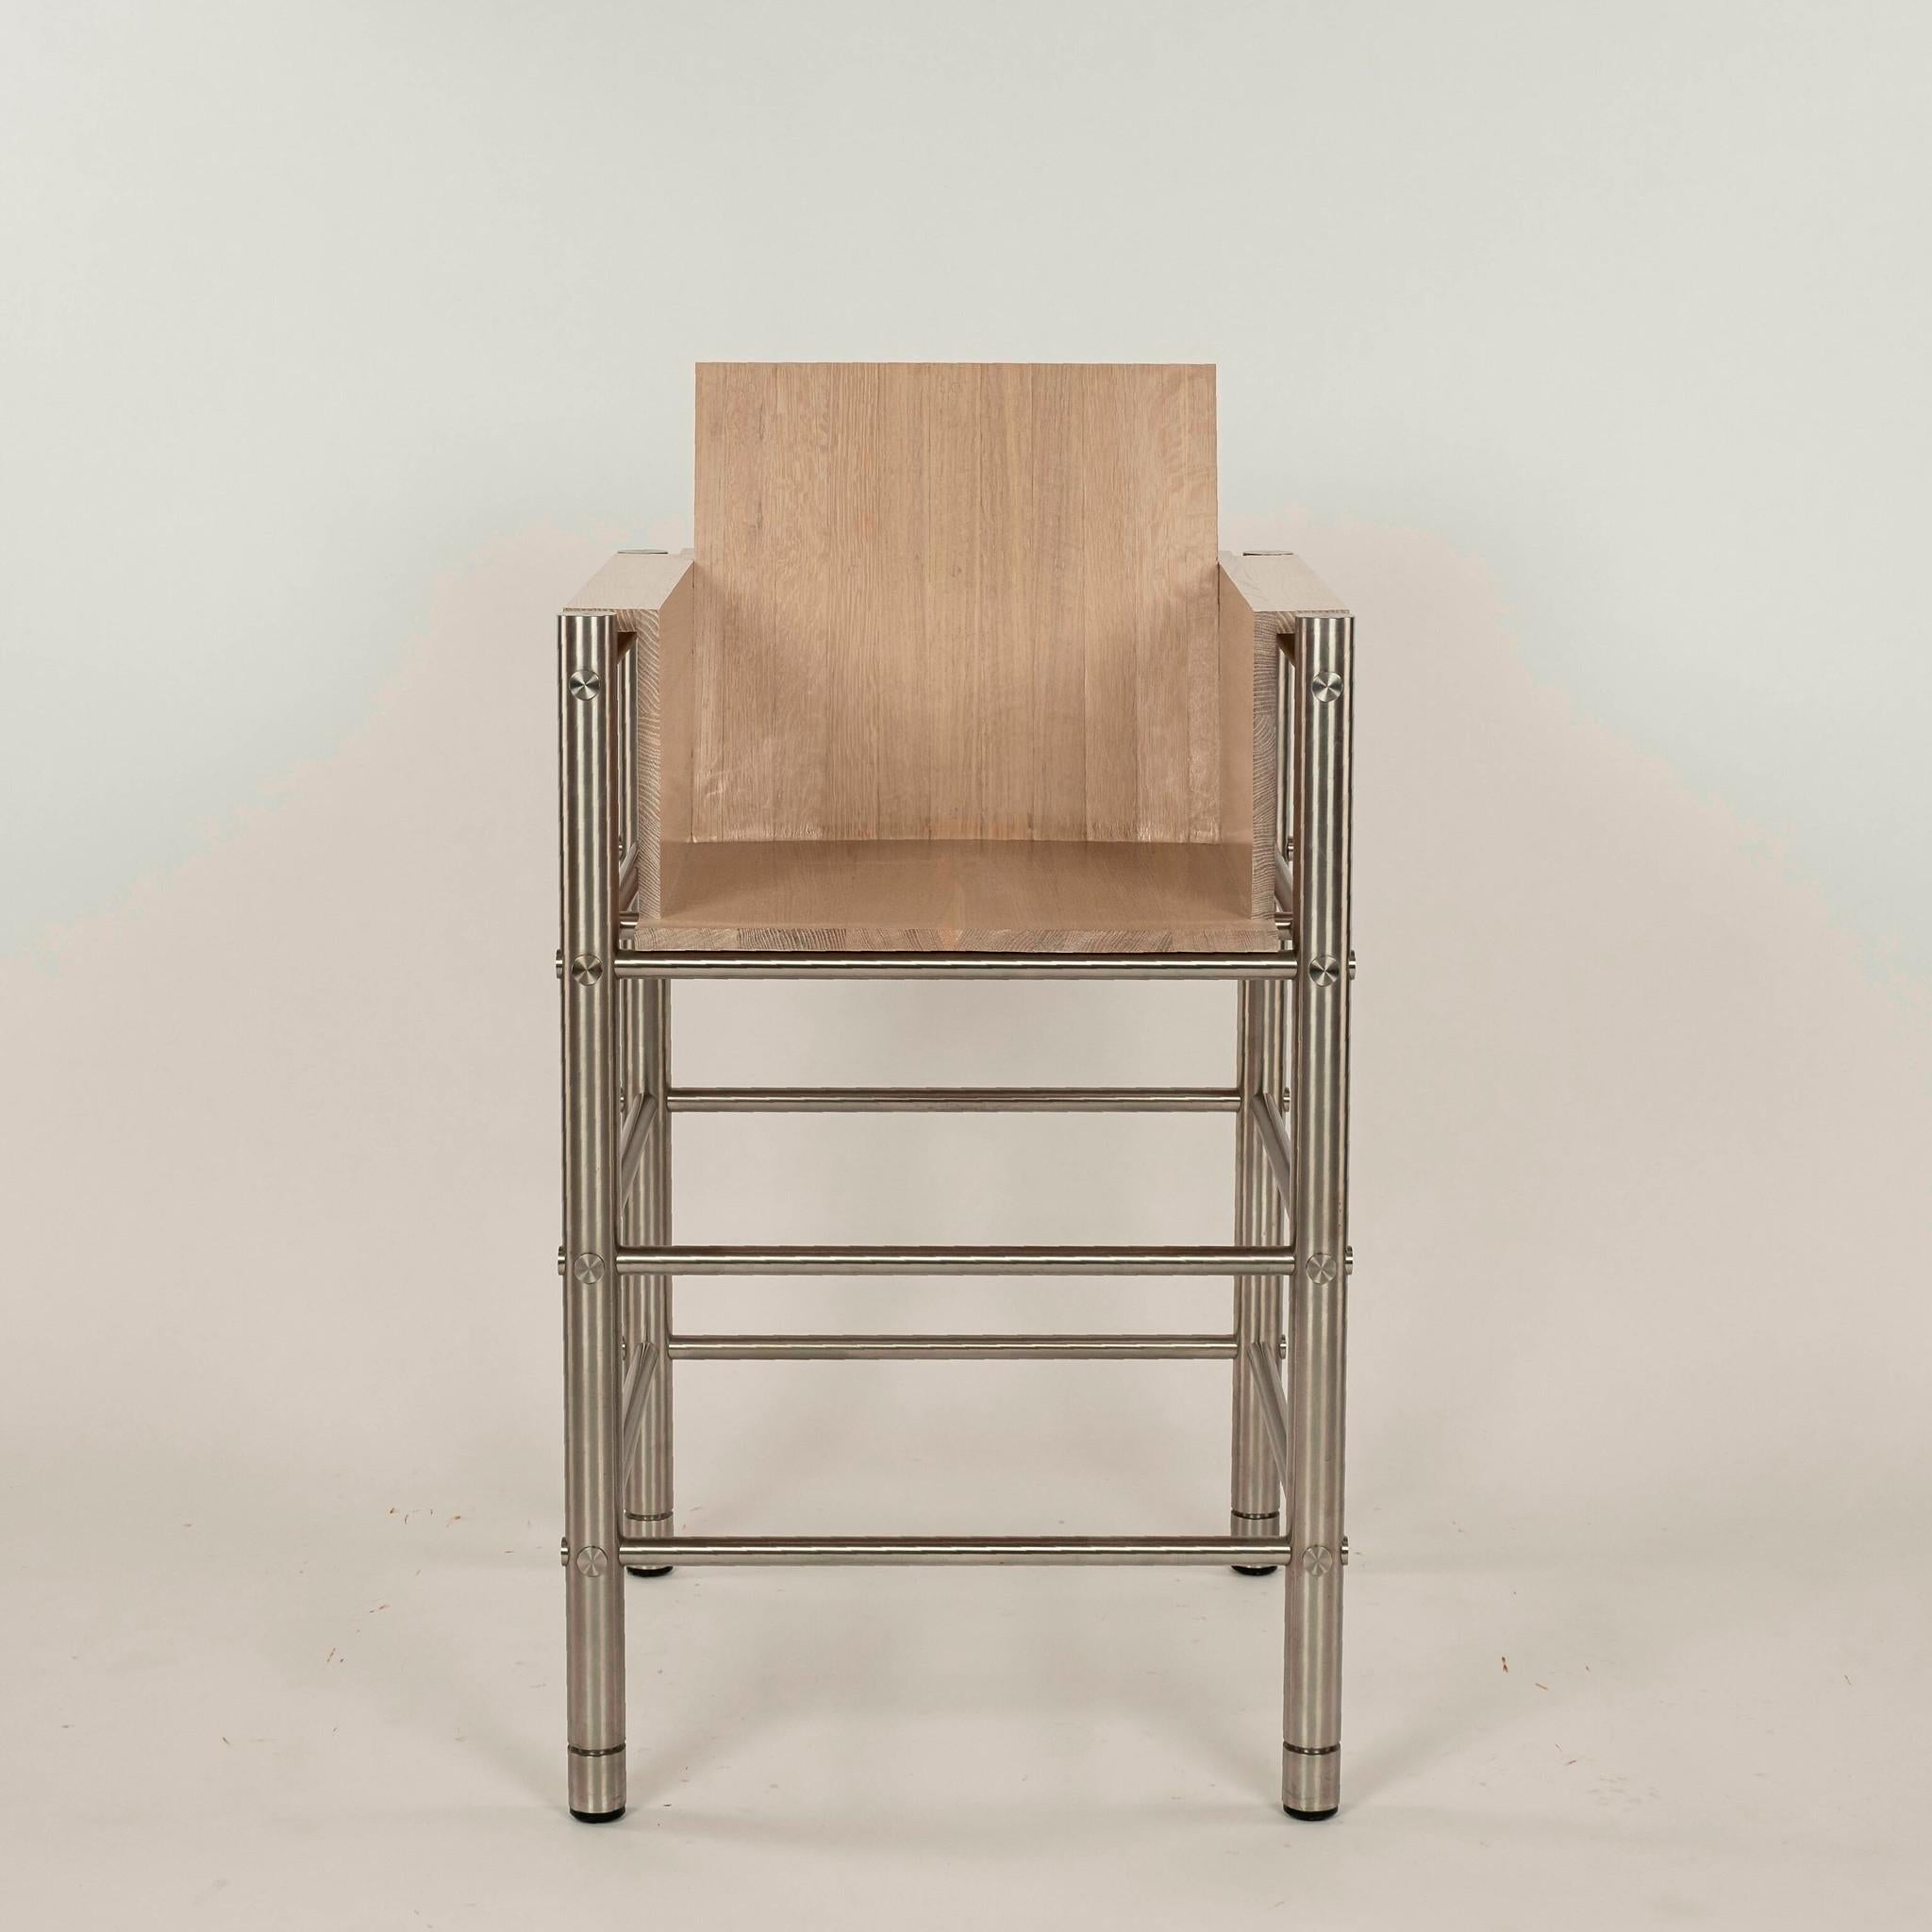 20th Century Maple and Steel Deco Style Bar Stool For Sale